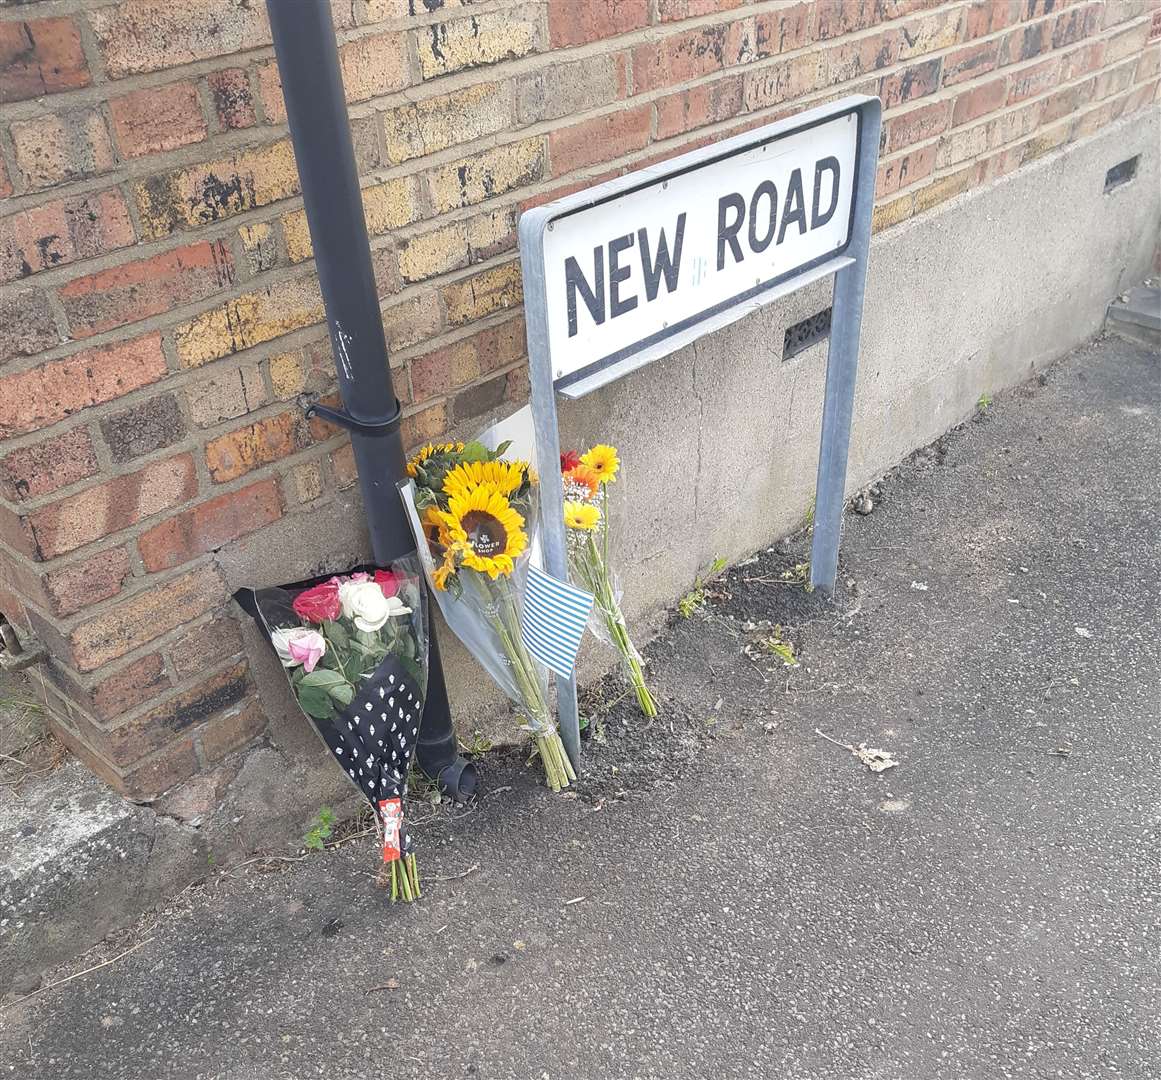 Floral tributes have been laid at the scene of a fatal crash on Swanley Lane at the junction with New Road where a 19-year-old cyclist from Dartford was killed